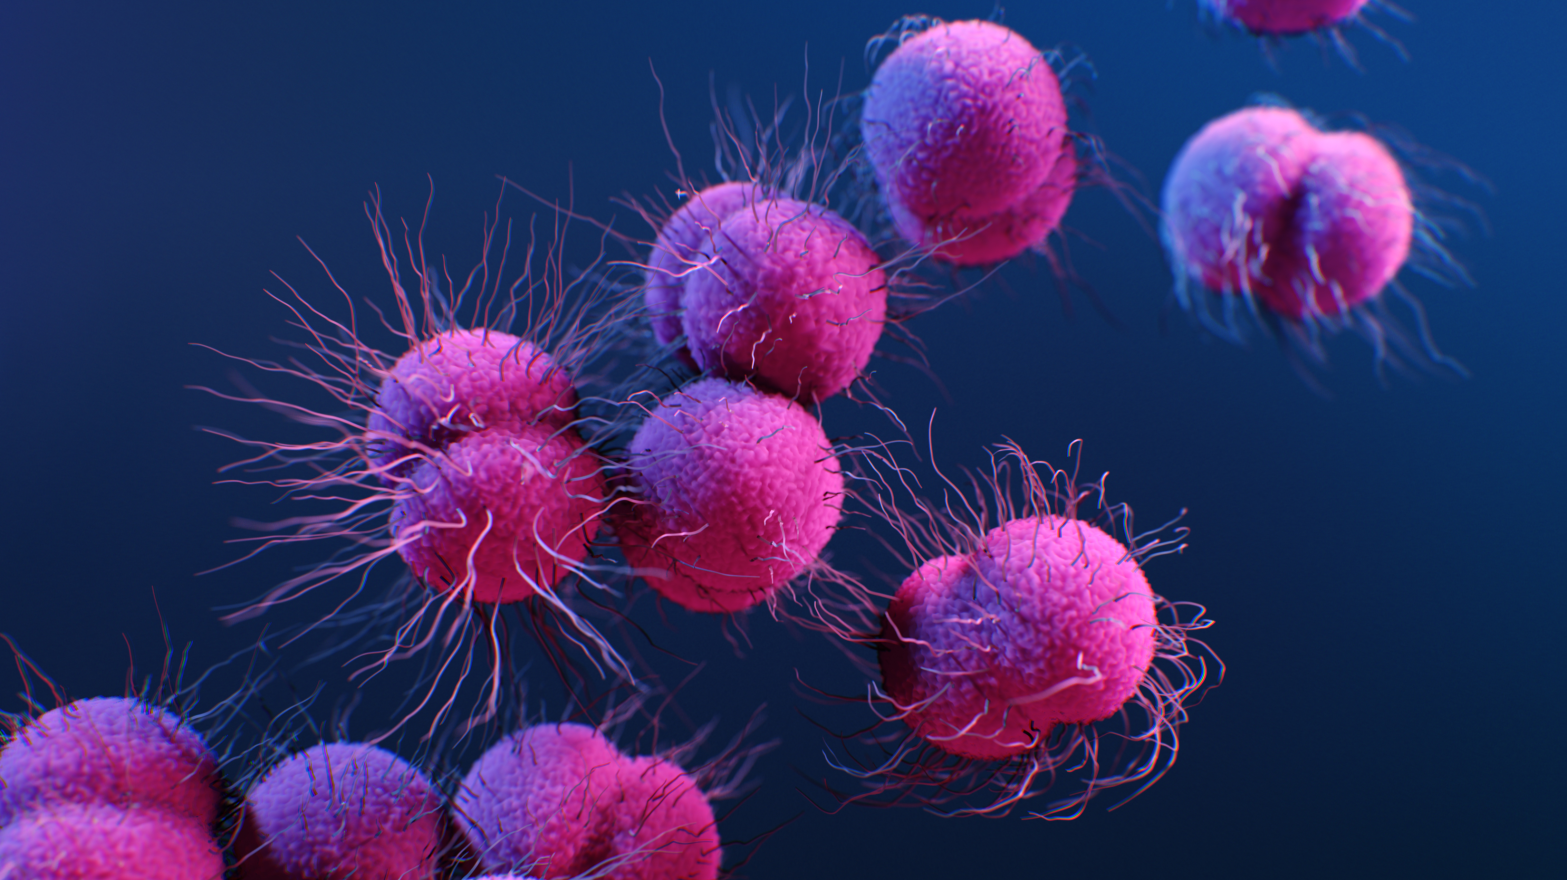 An illustration of Neisseria gonorrhoeae bacteria, the cause of gonorrhea. (Illustration: Alissa Eckert/CDC)